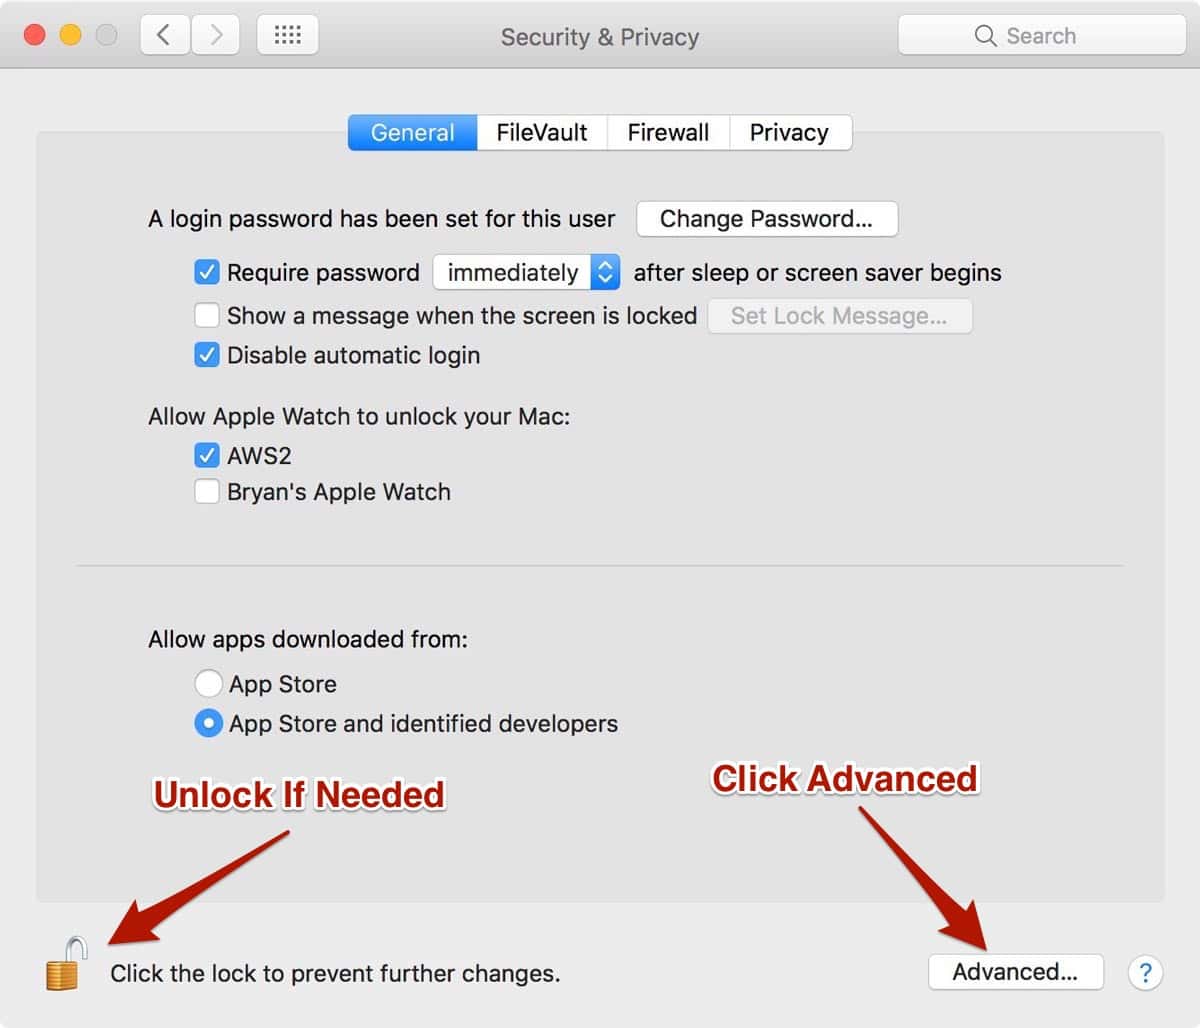 Security & Privacy Preferences in macOS Sierra